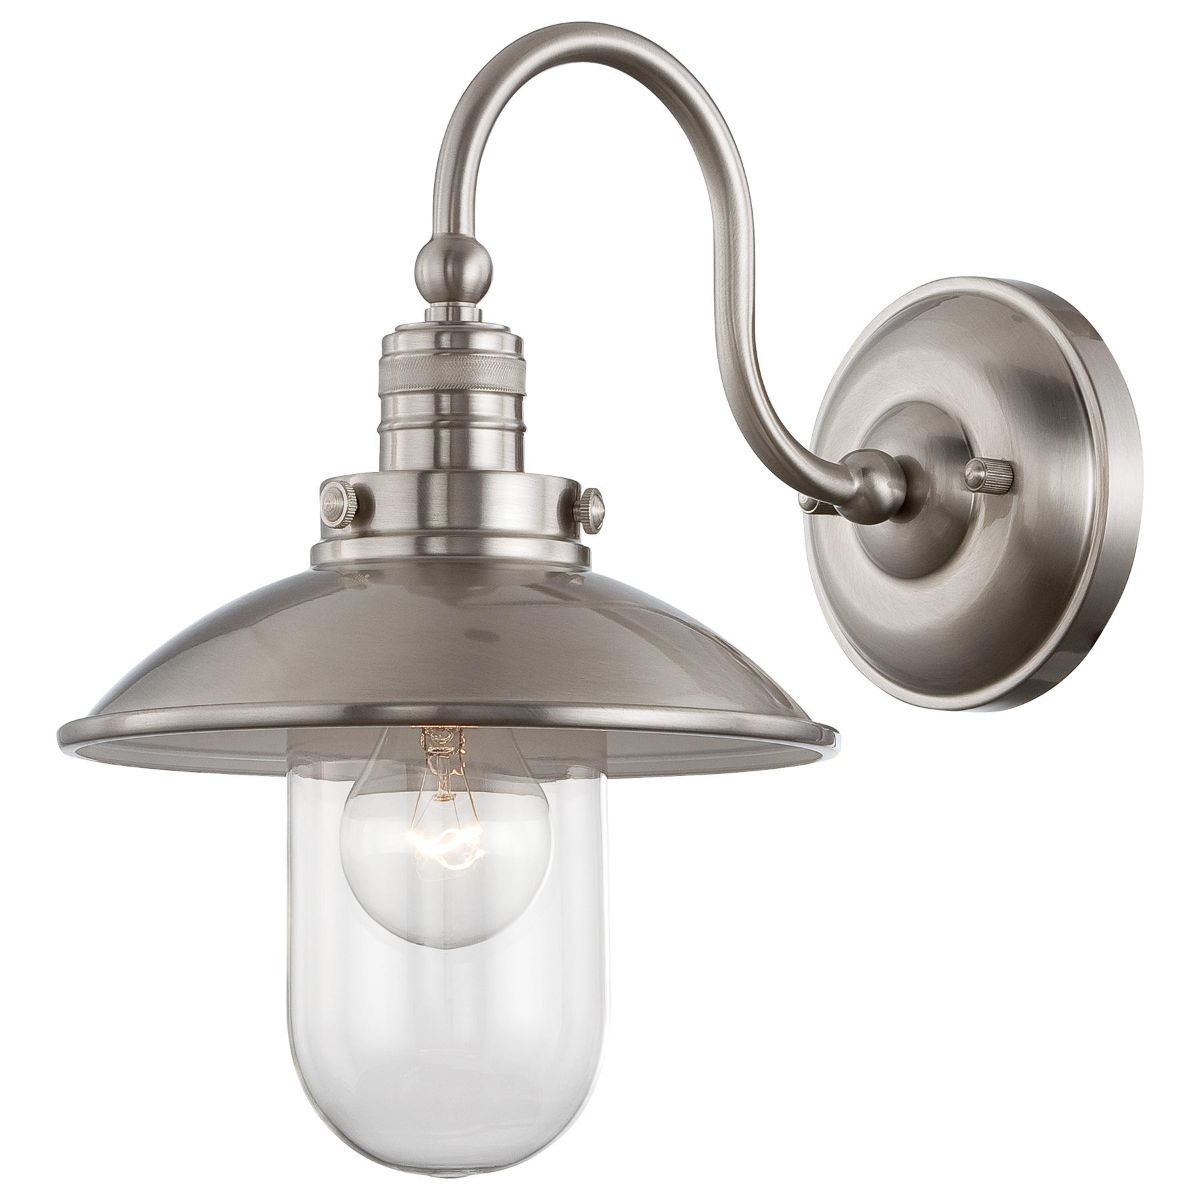 Downtown Edison 13 in. Armed Sconce Brushed Nickel finish